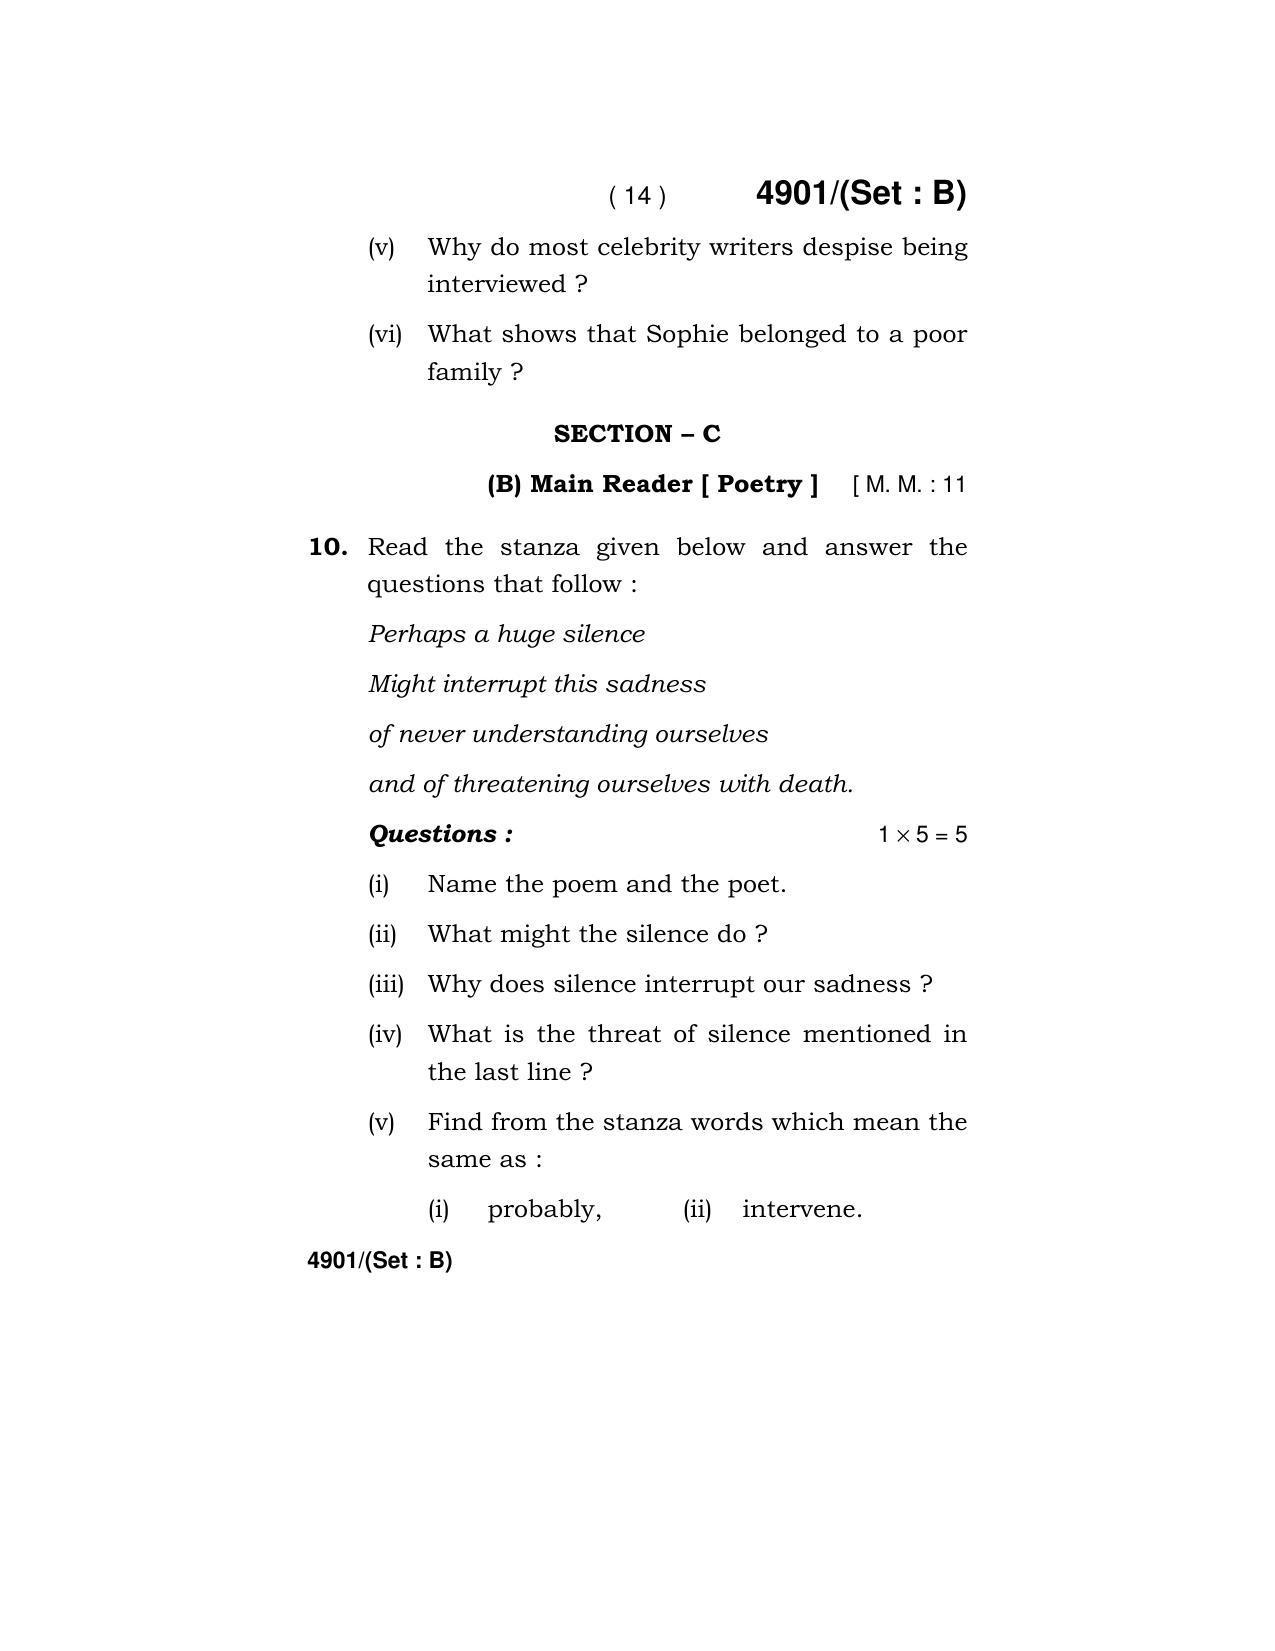 Haryana Board HBSE Class 12 English Core 2020 Question Paper - Page 30